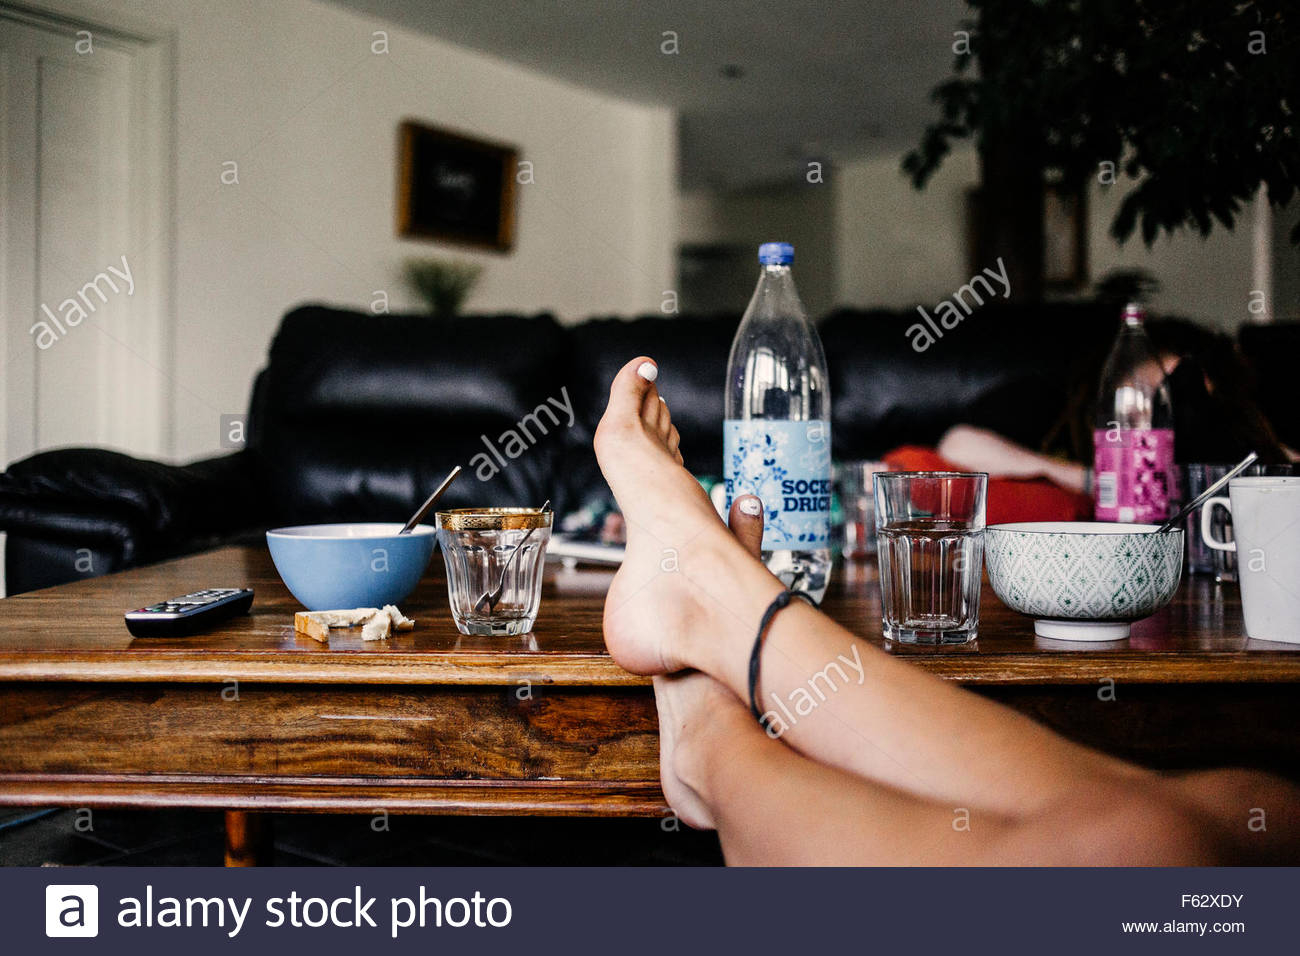 Low Section Of Woman With Feet Up On Coffee Table At Home Stock regarding sizing 1300 X 956